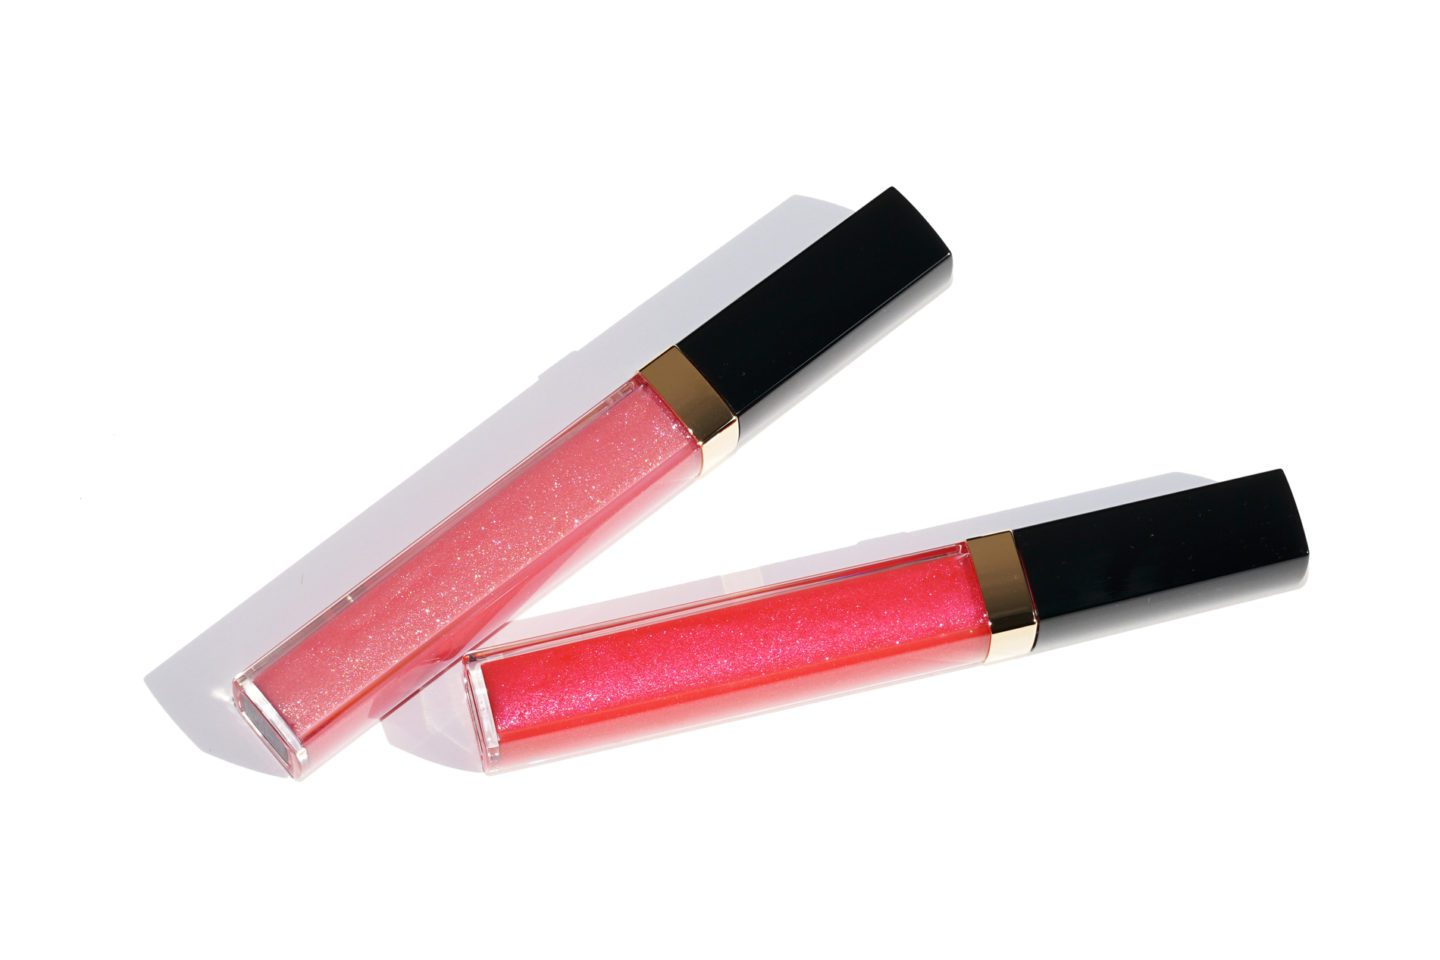 Chanel Rouge Coco Gloss in Magnolia and Camelia